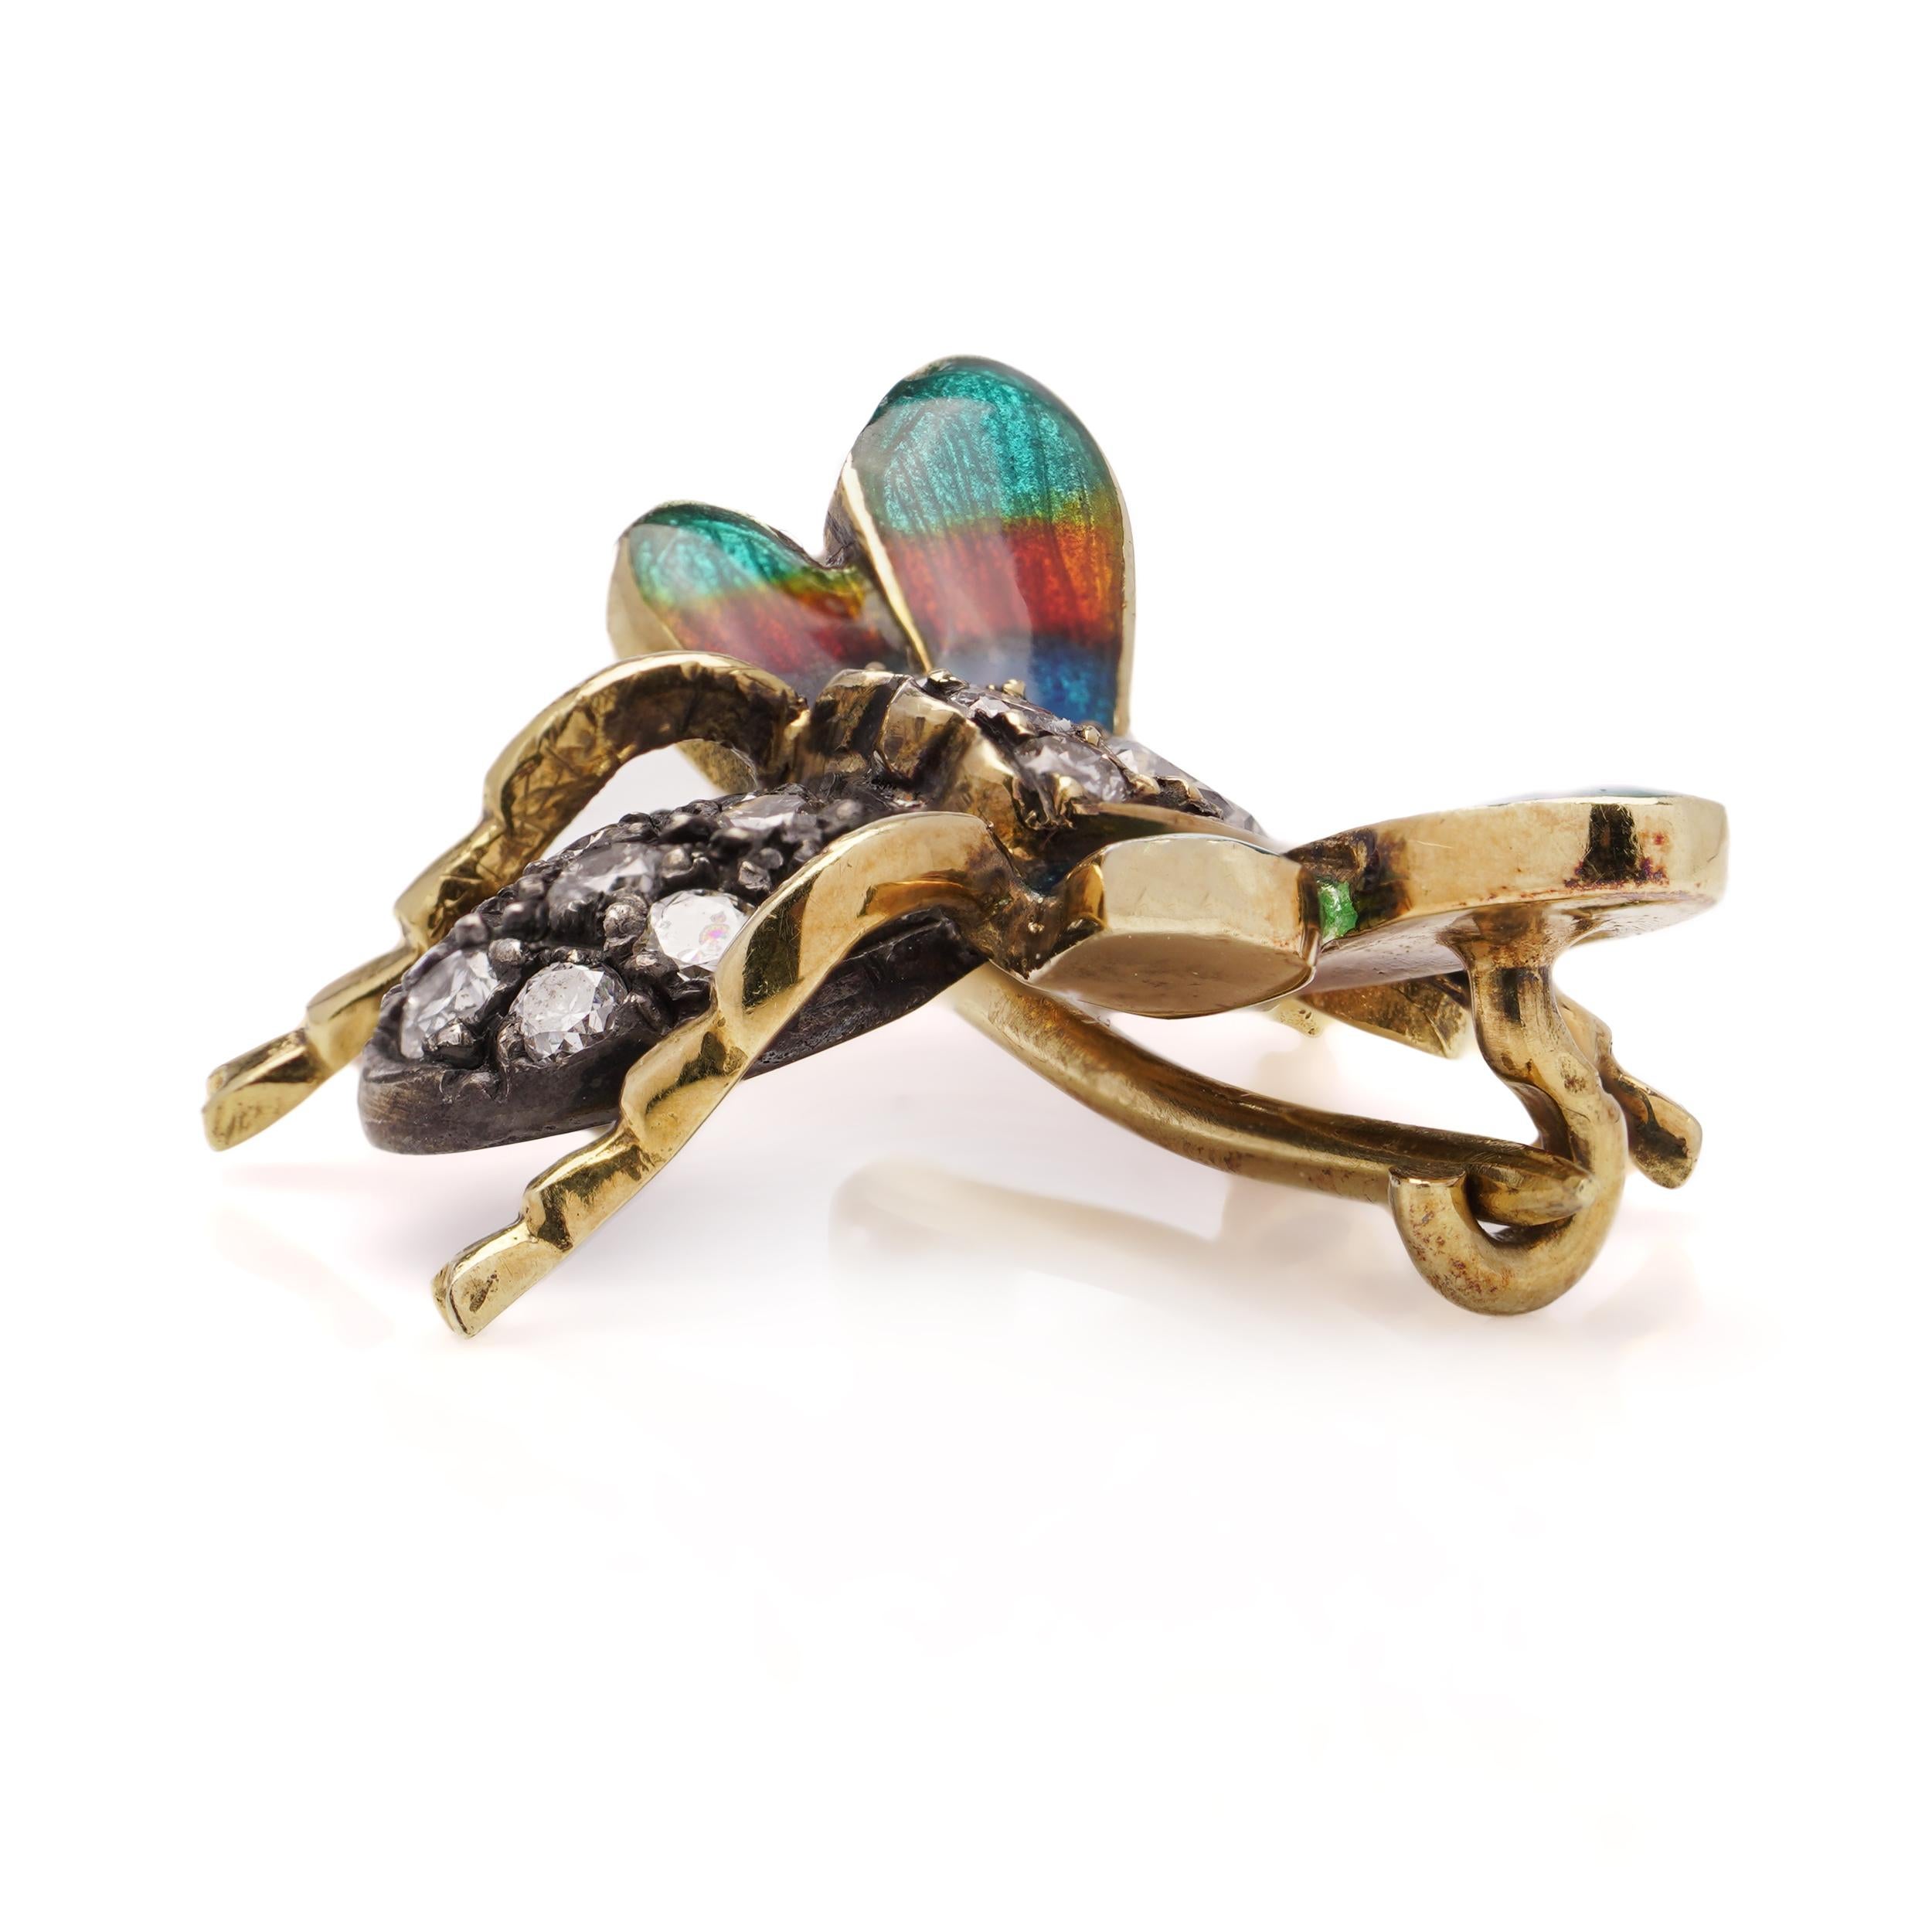  Edwardian 18kt. yellow gold and silver open-winged insect brooch For Sale 5